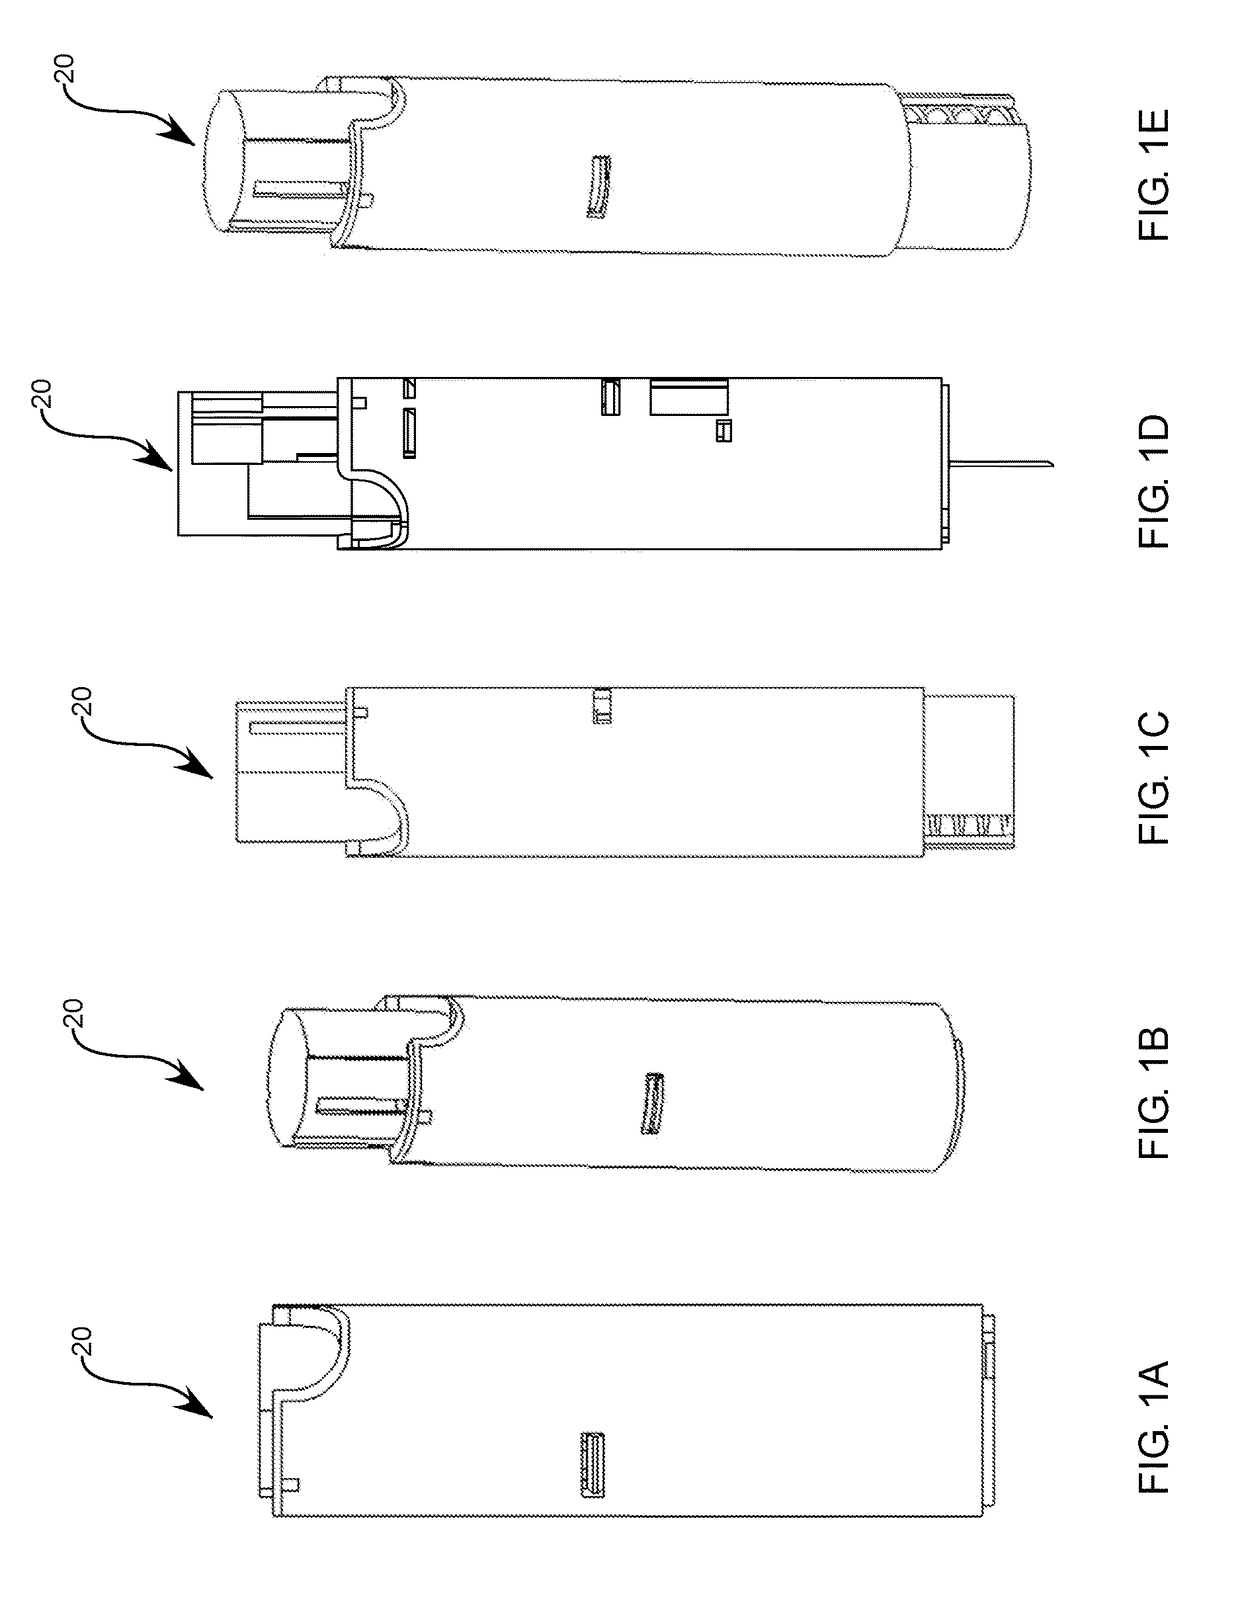 Portable drug mixing and delivery device and associated methods